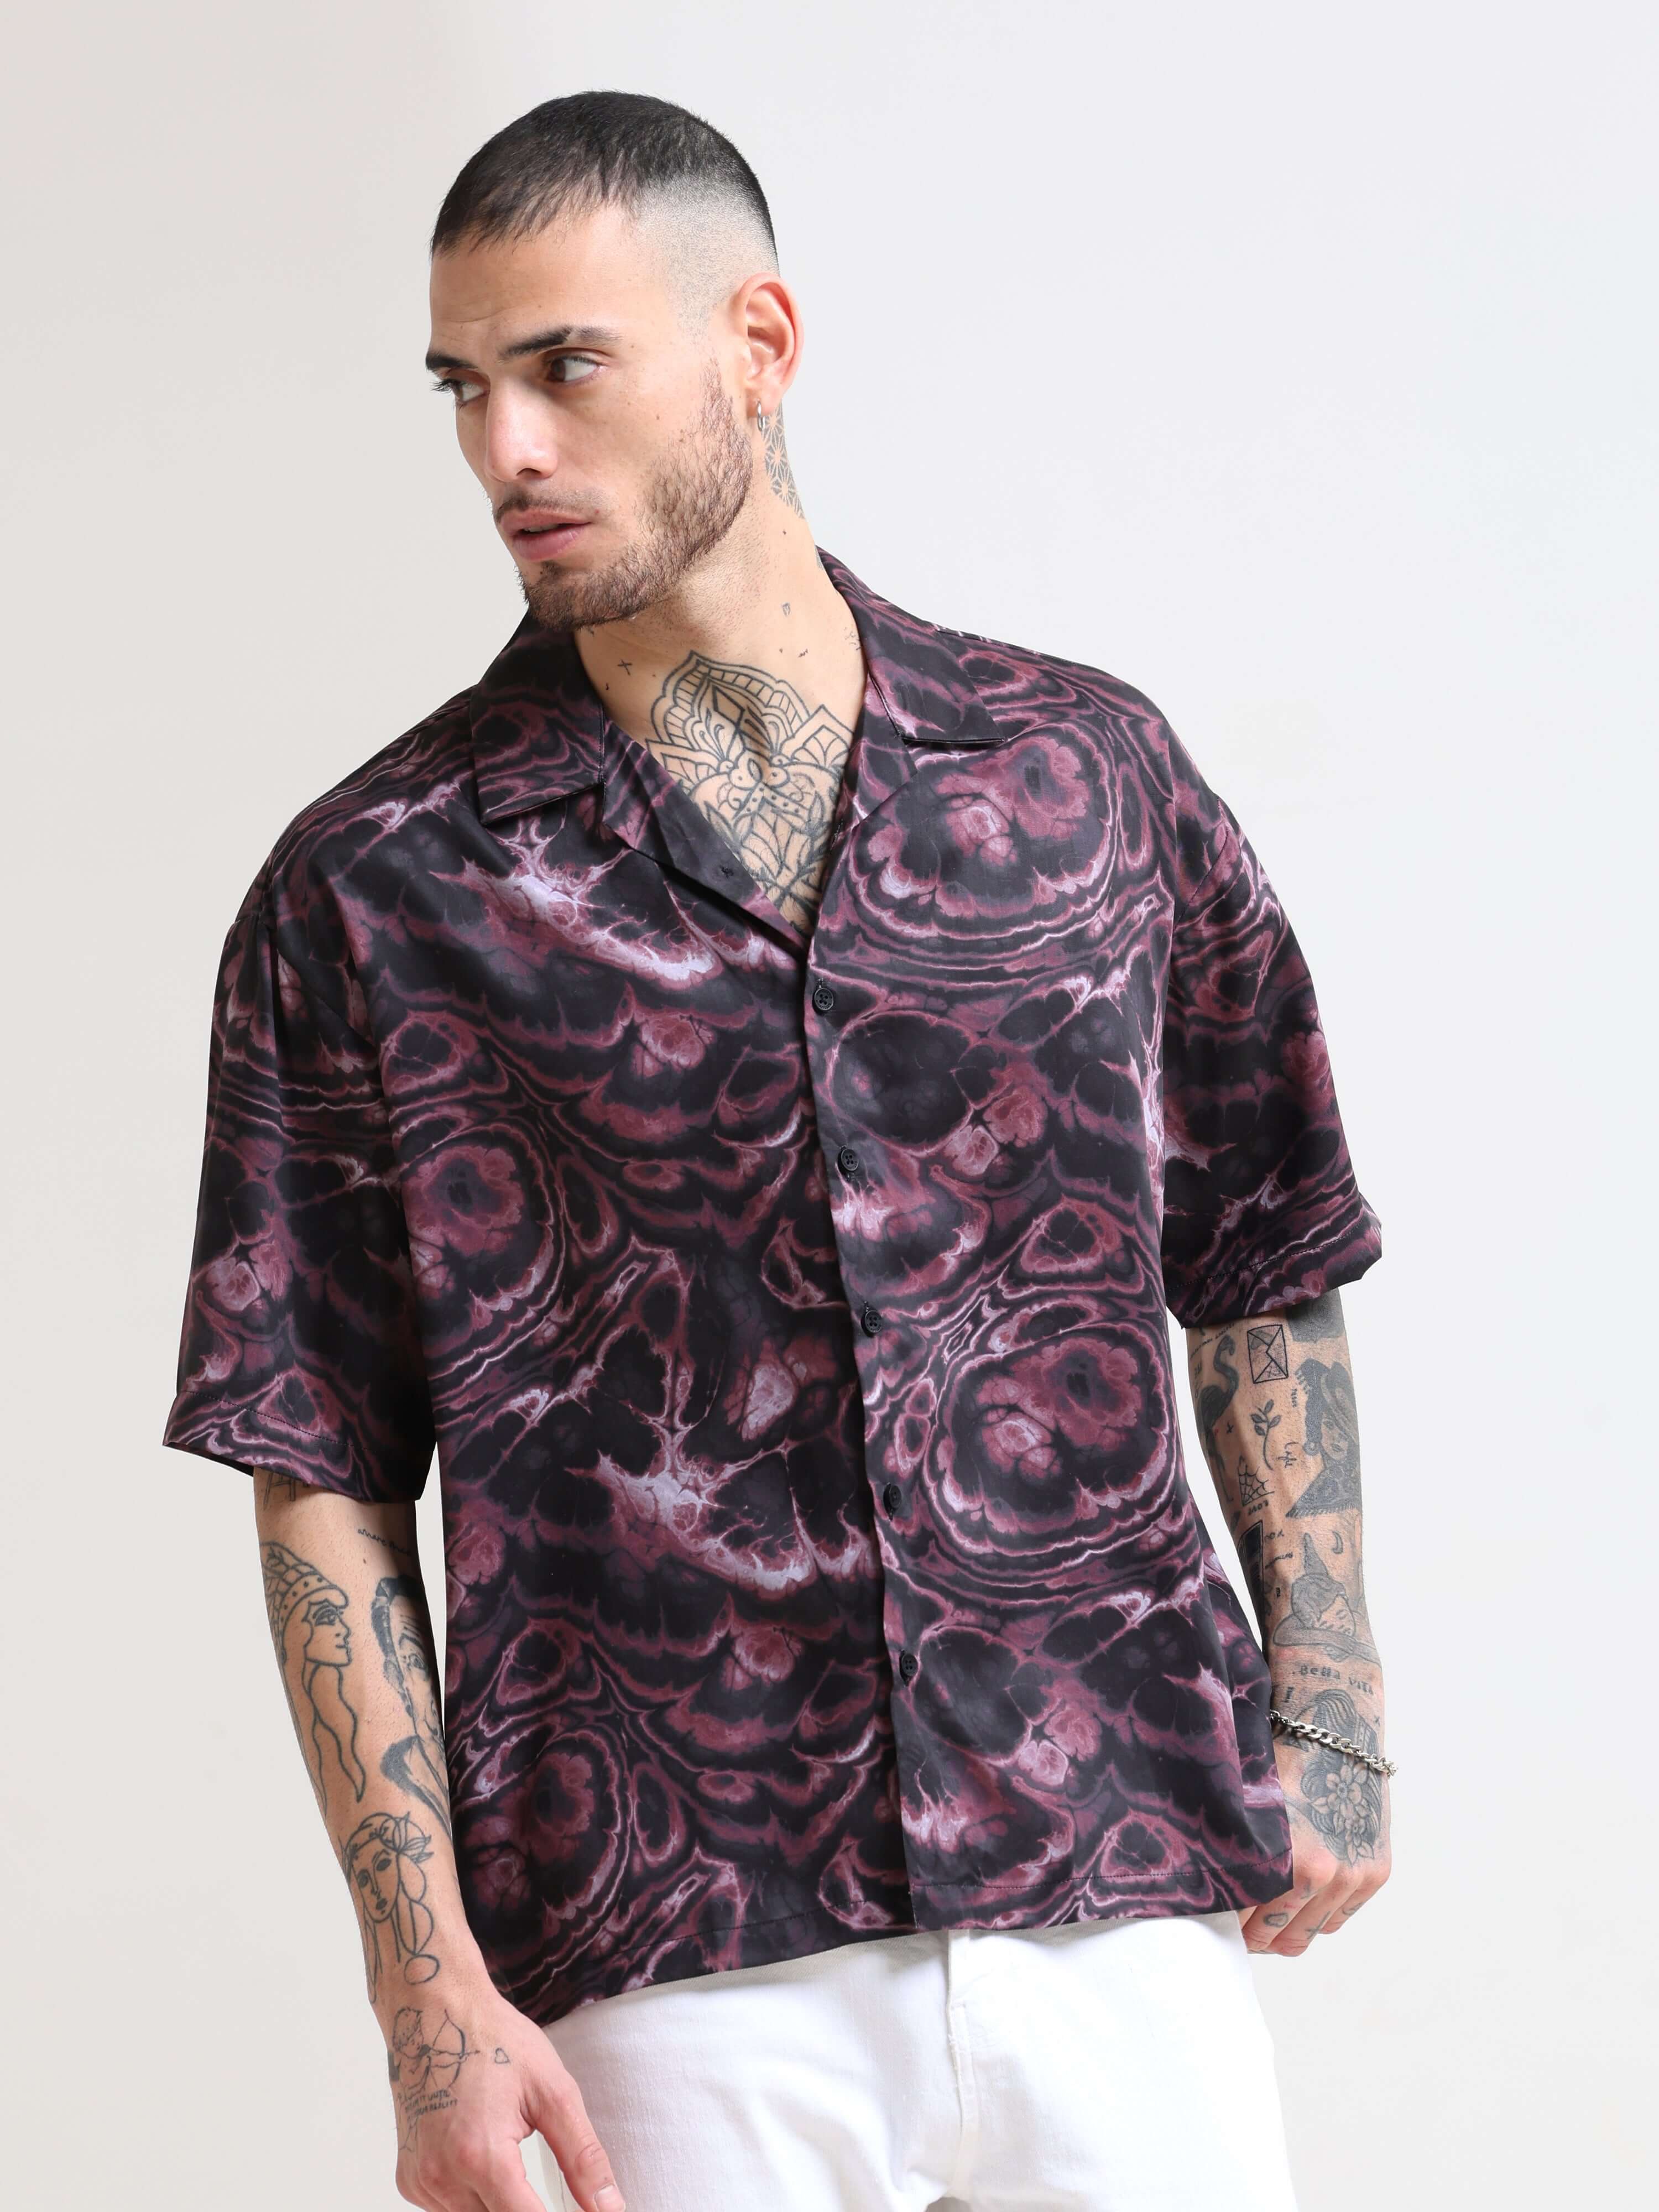 Ablaze Turbid Oversized Shirt shop online at Estilocus. Our Ablaze Turbid Oversized Shirt is perfect for those Hawaiian days. The relaxed fit and lightweight fabric make it comfortable to wear all day. Its classic style is perfect for those summer streetw